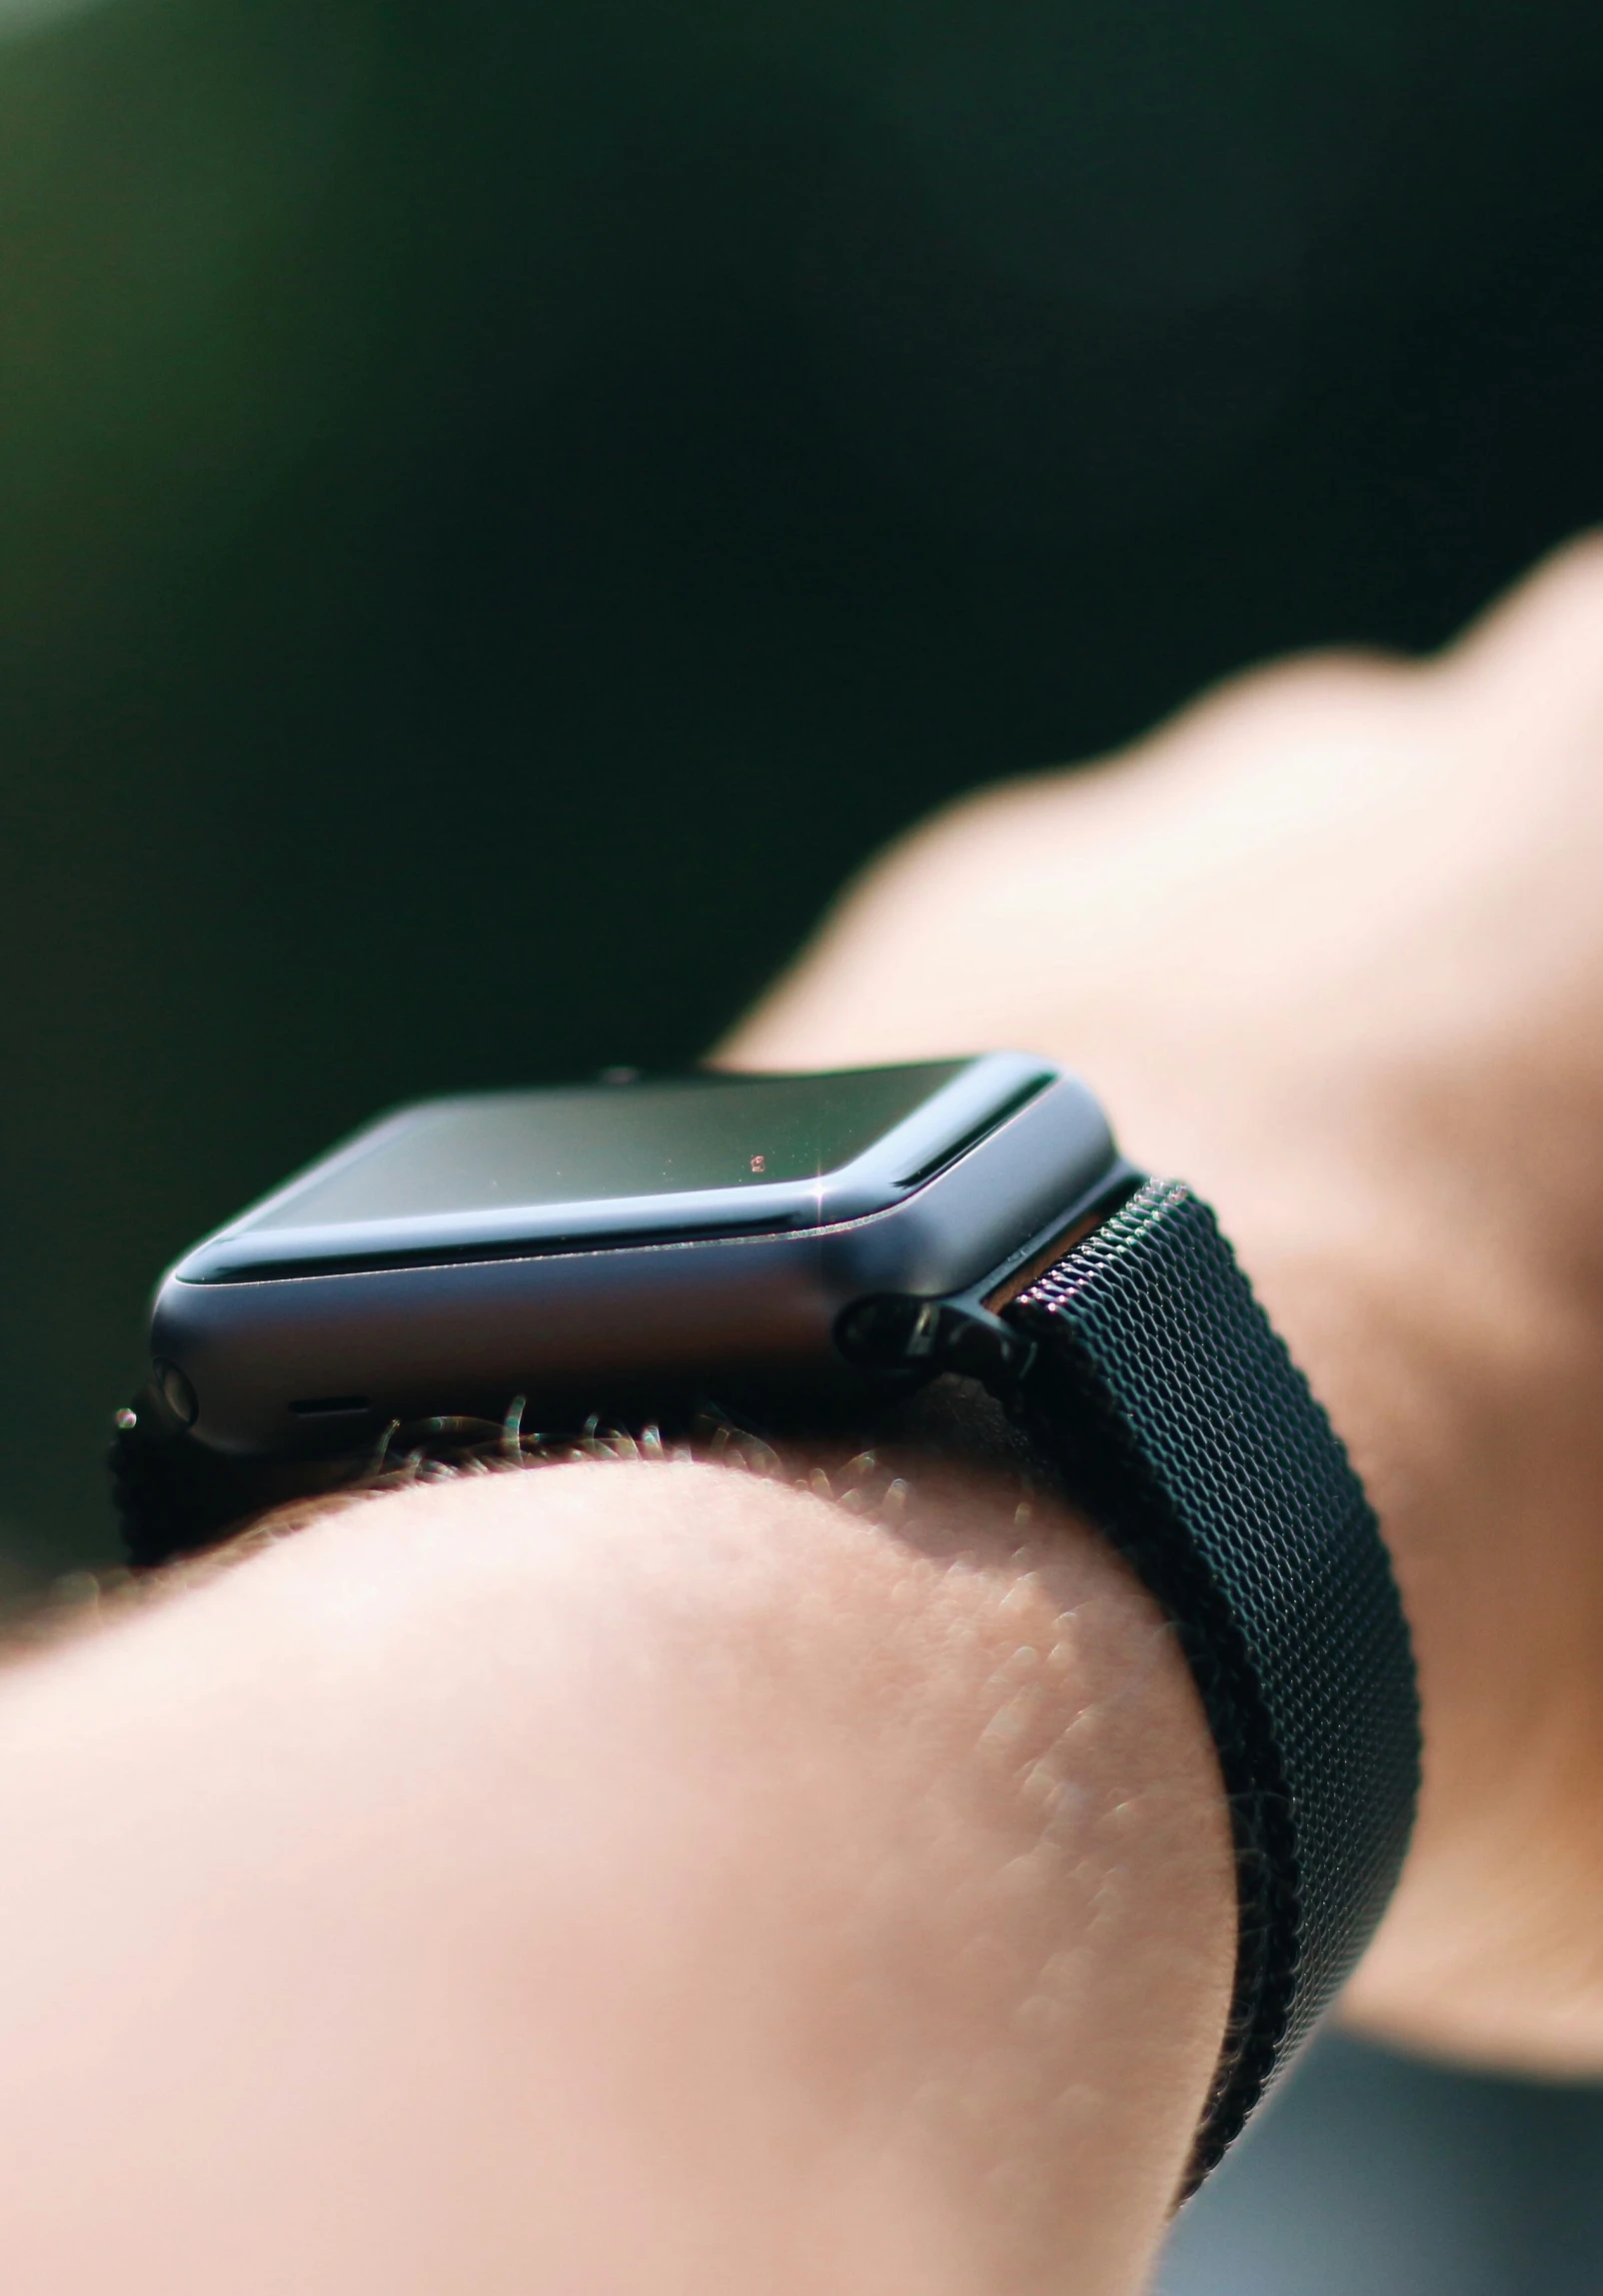 a smart watch is attached to the wrist band